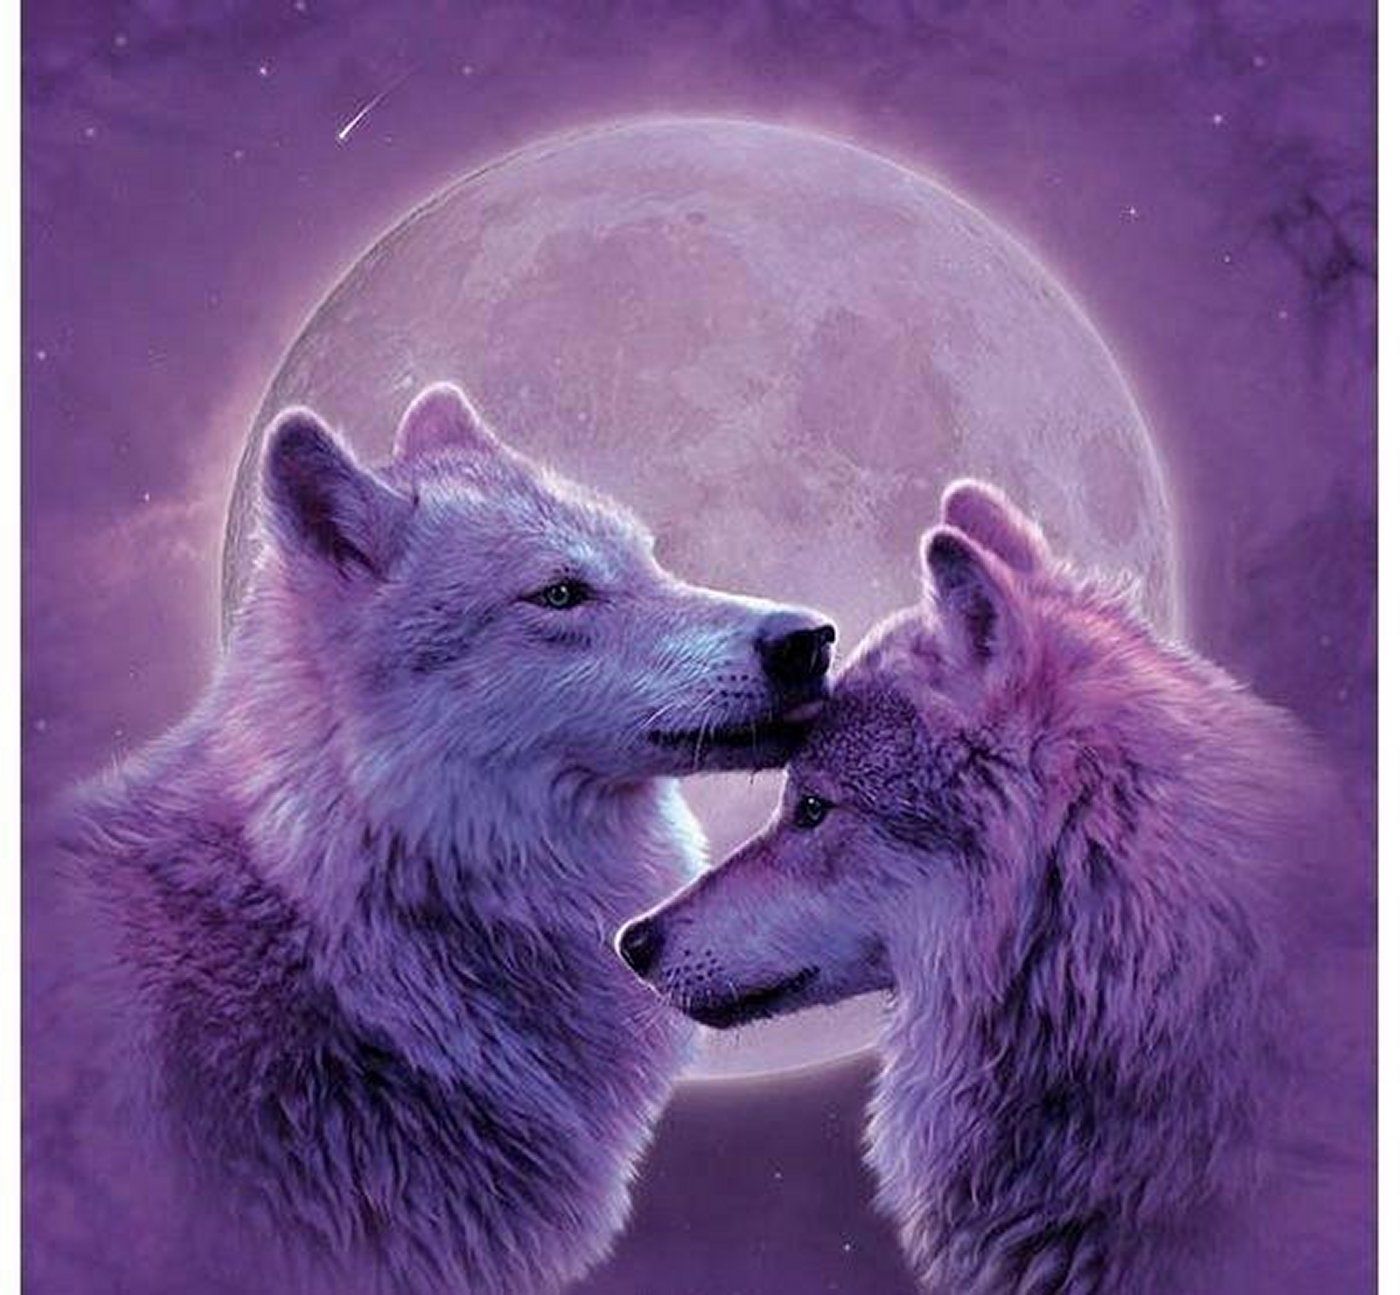 The Two Wolves Story (Here's its Deeper Meaning) ⋆ LonerWolf